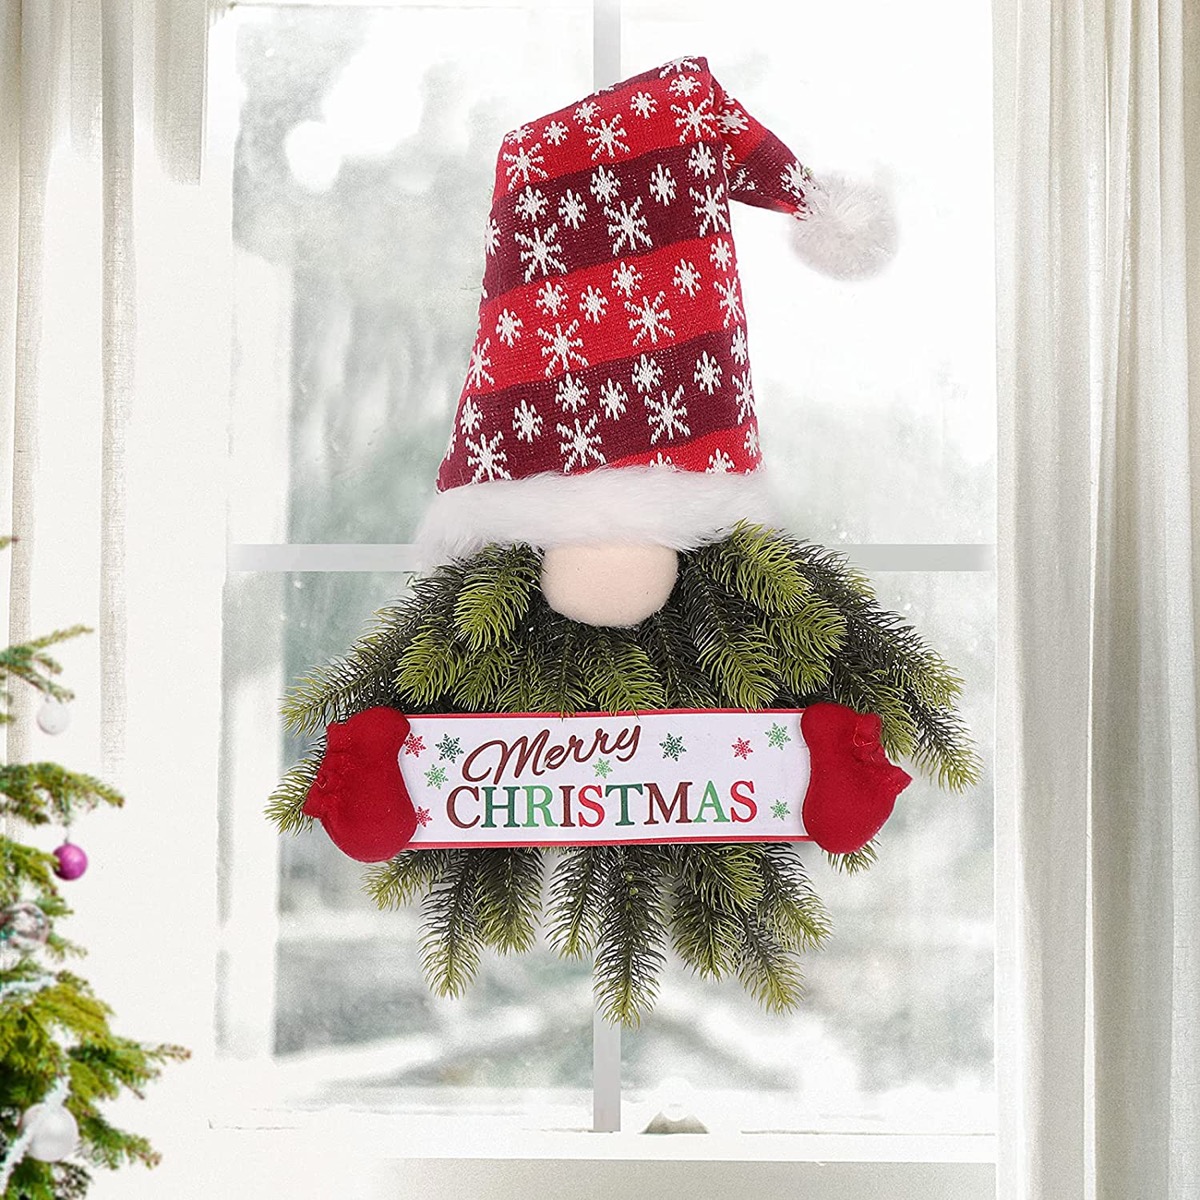 20+ office door decoration for christmas ideas to make your office look festive